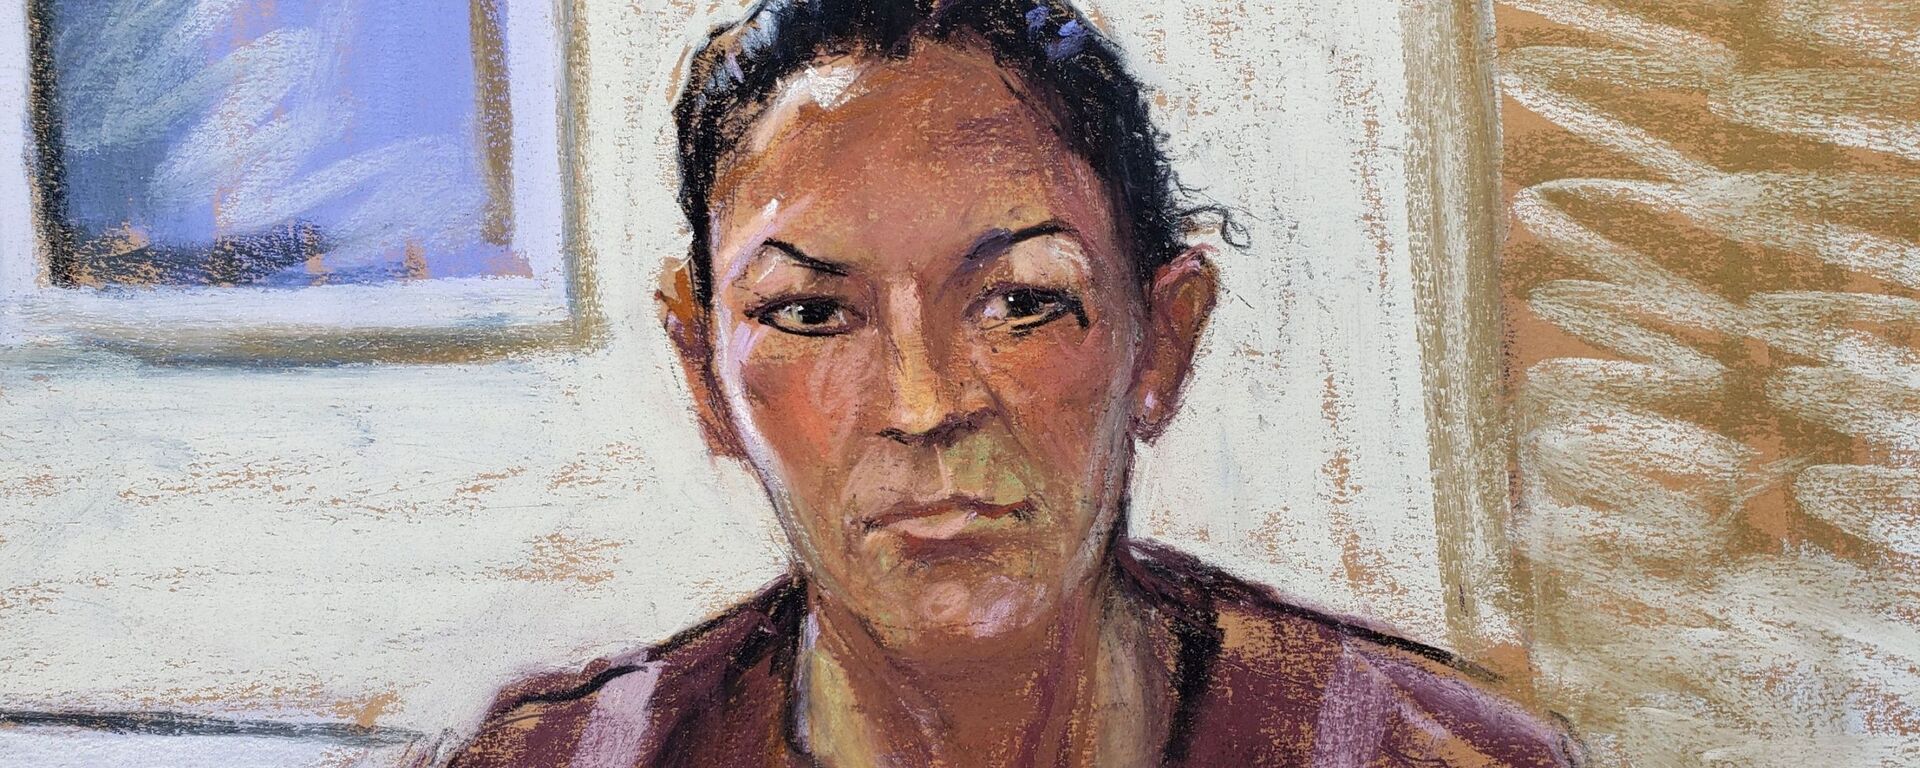 Ghislaine Maxwell appears via video link during her arraignment hearing where she was denied bail for her role aiding Jeffrey Epstein to recruit and eventually abuse of minor girls, in Manhattan Federal Court, in the Manhattan borough of New York City, New York, U.S. July 14, 2020 in this courtroom sketch - Sputnik International, 1920, 27.04.2021